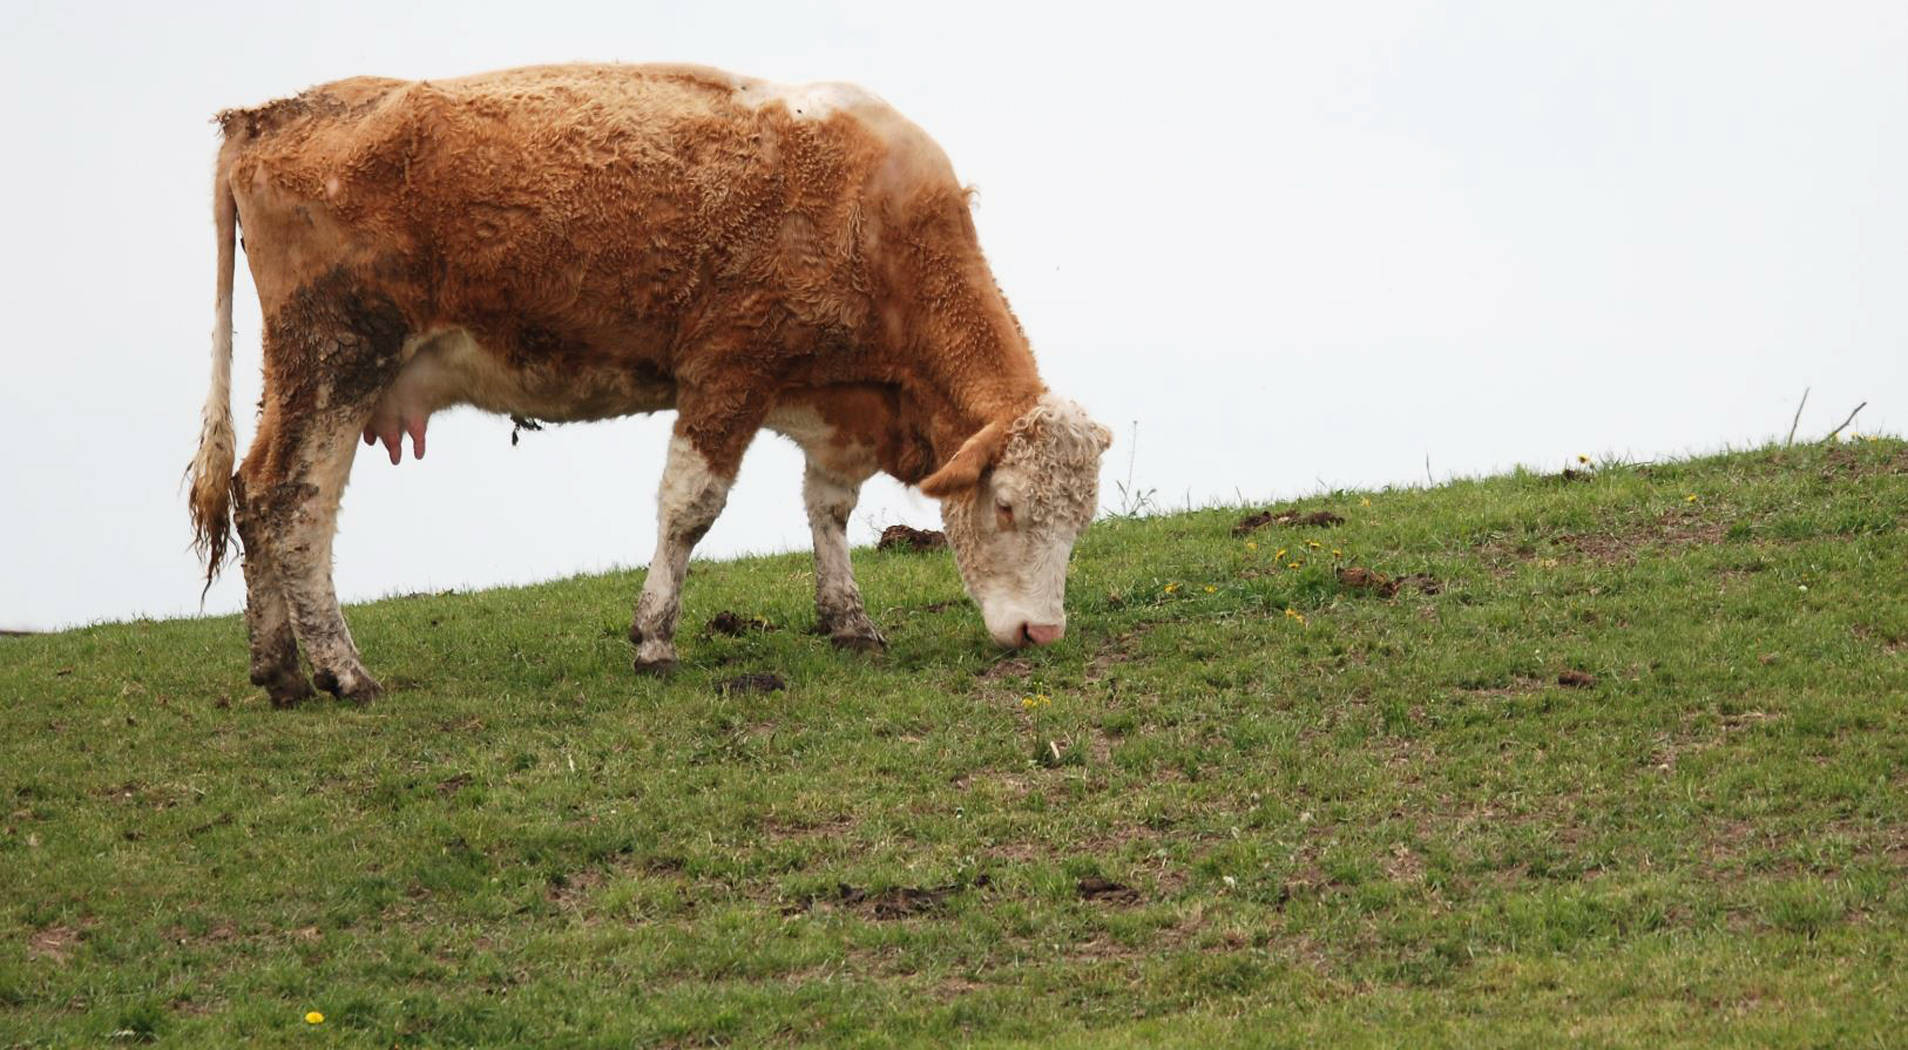 Cute Cow Eating Grass On Hill